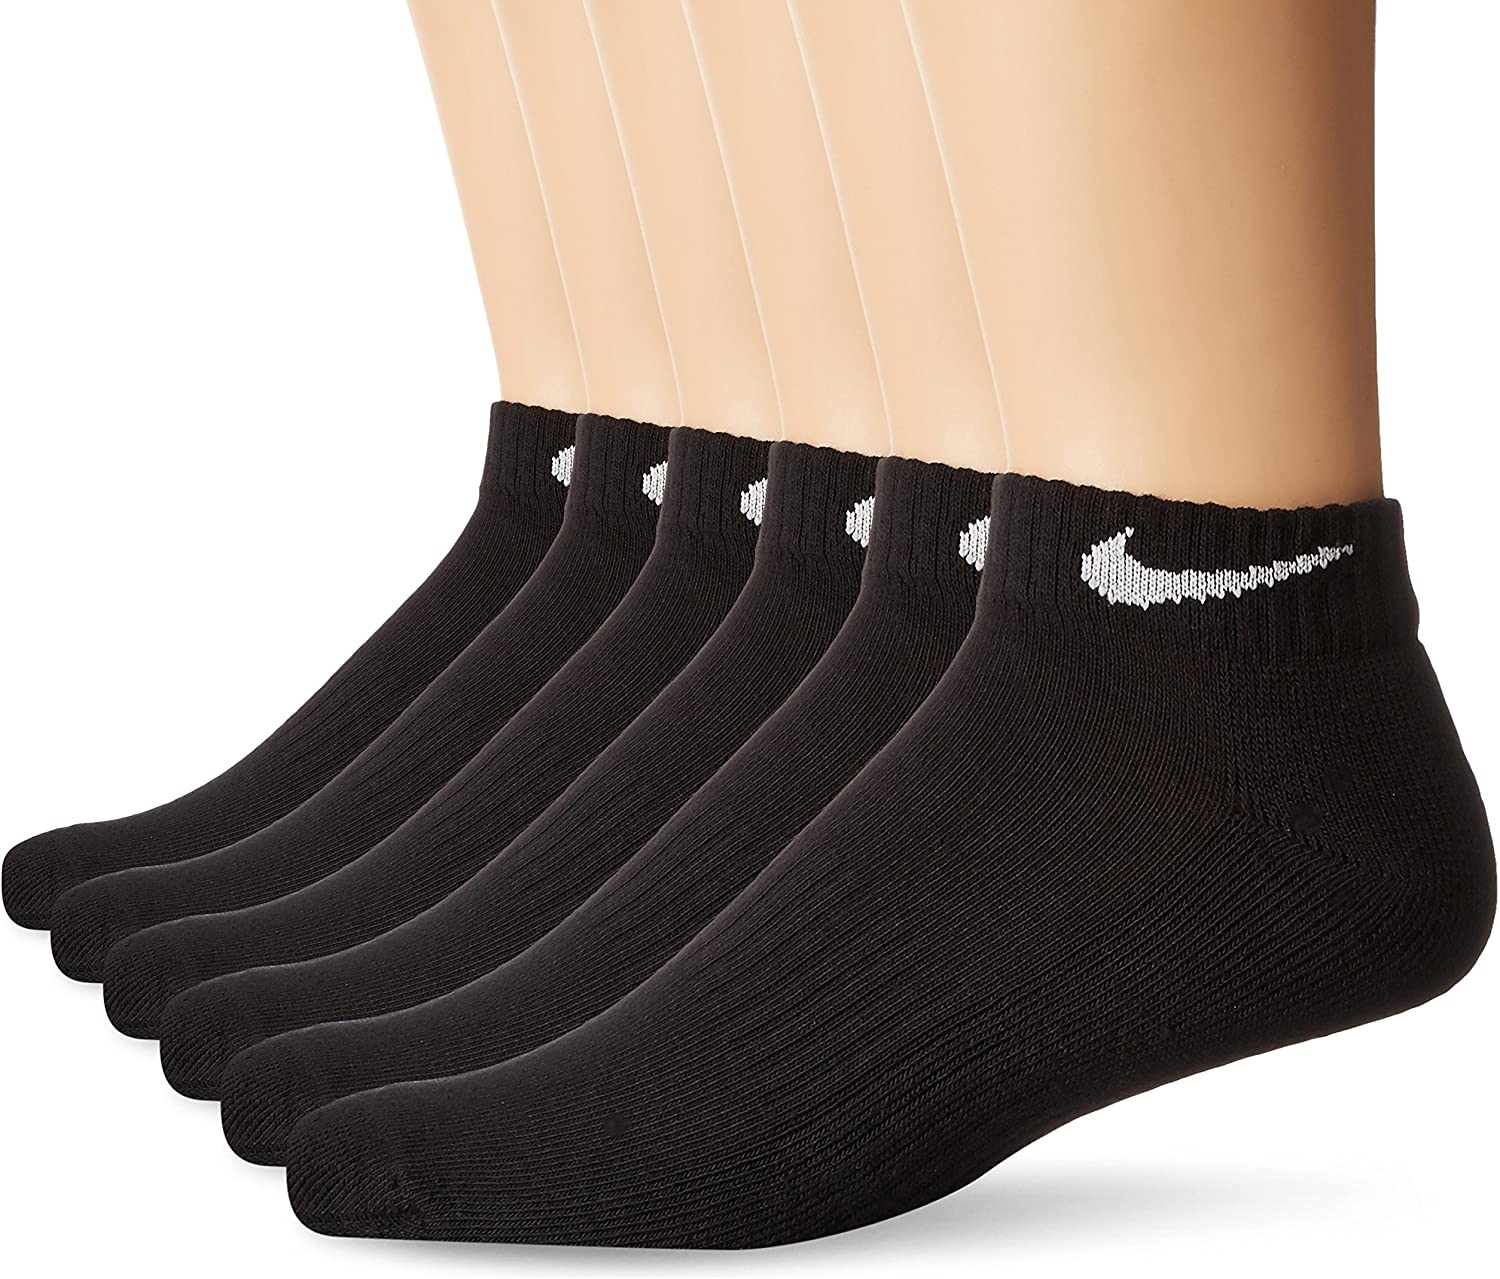 Nike Performance Arch Support Low Rise Socks, 6-Pair